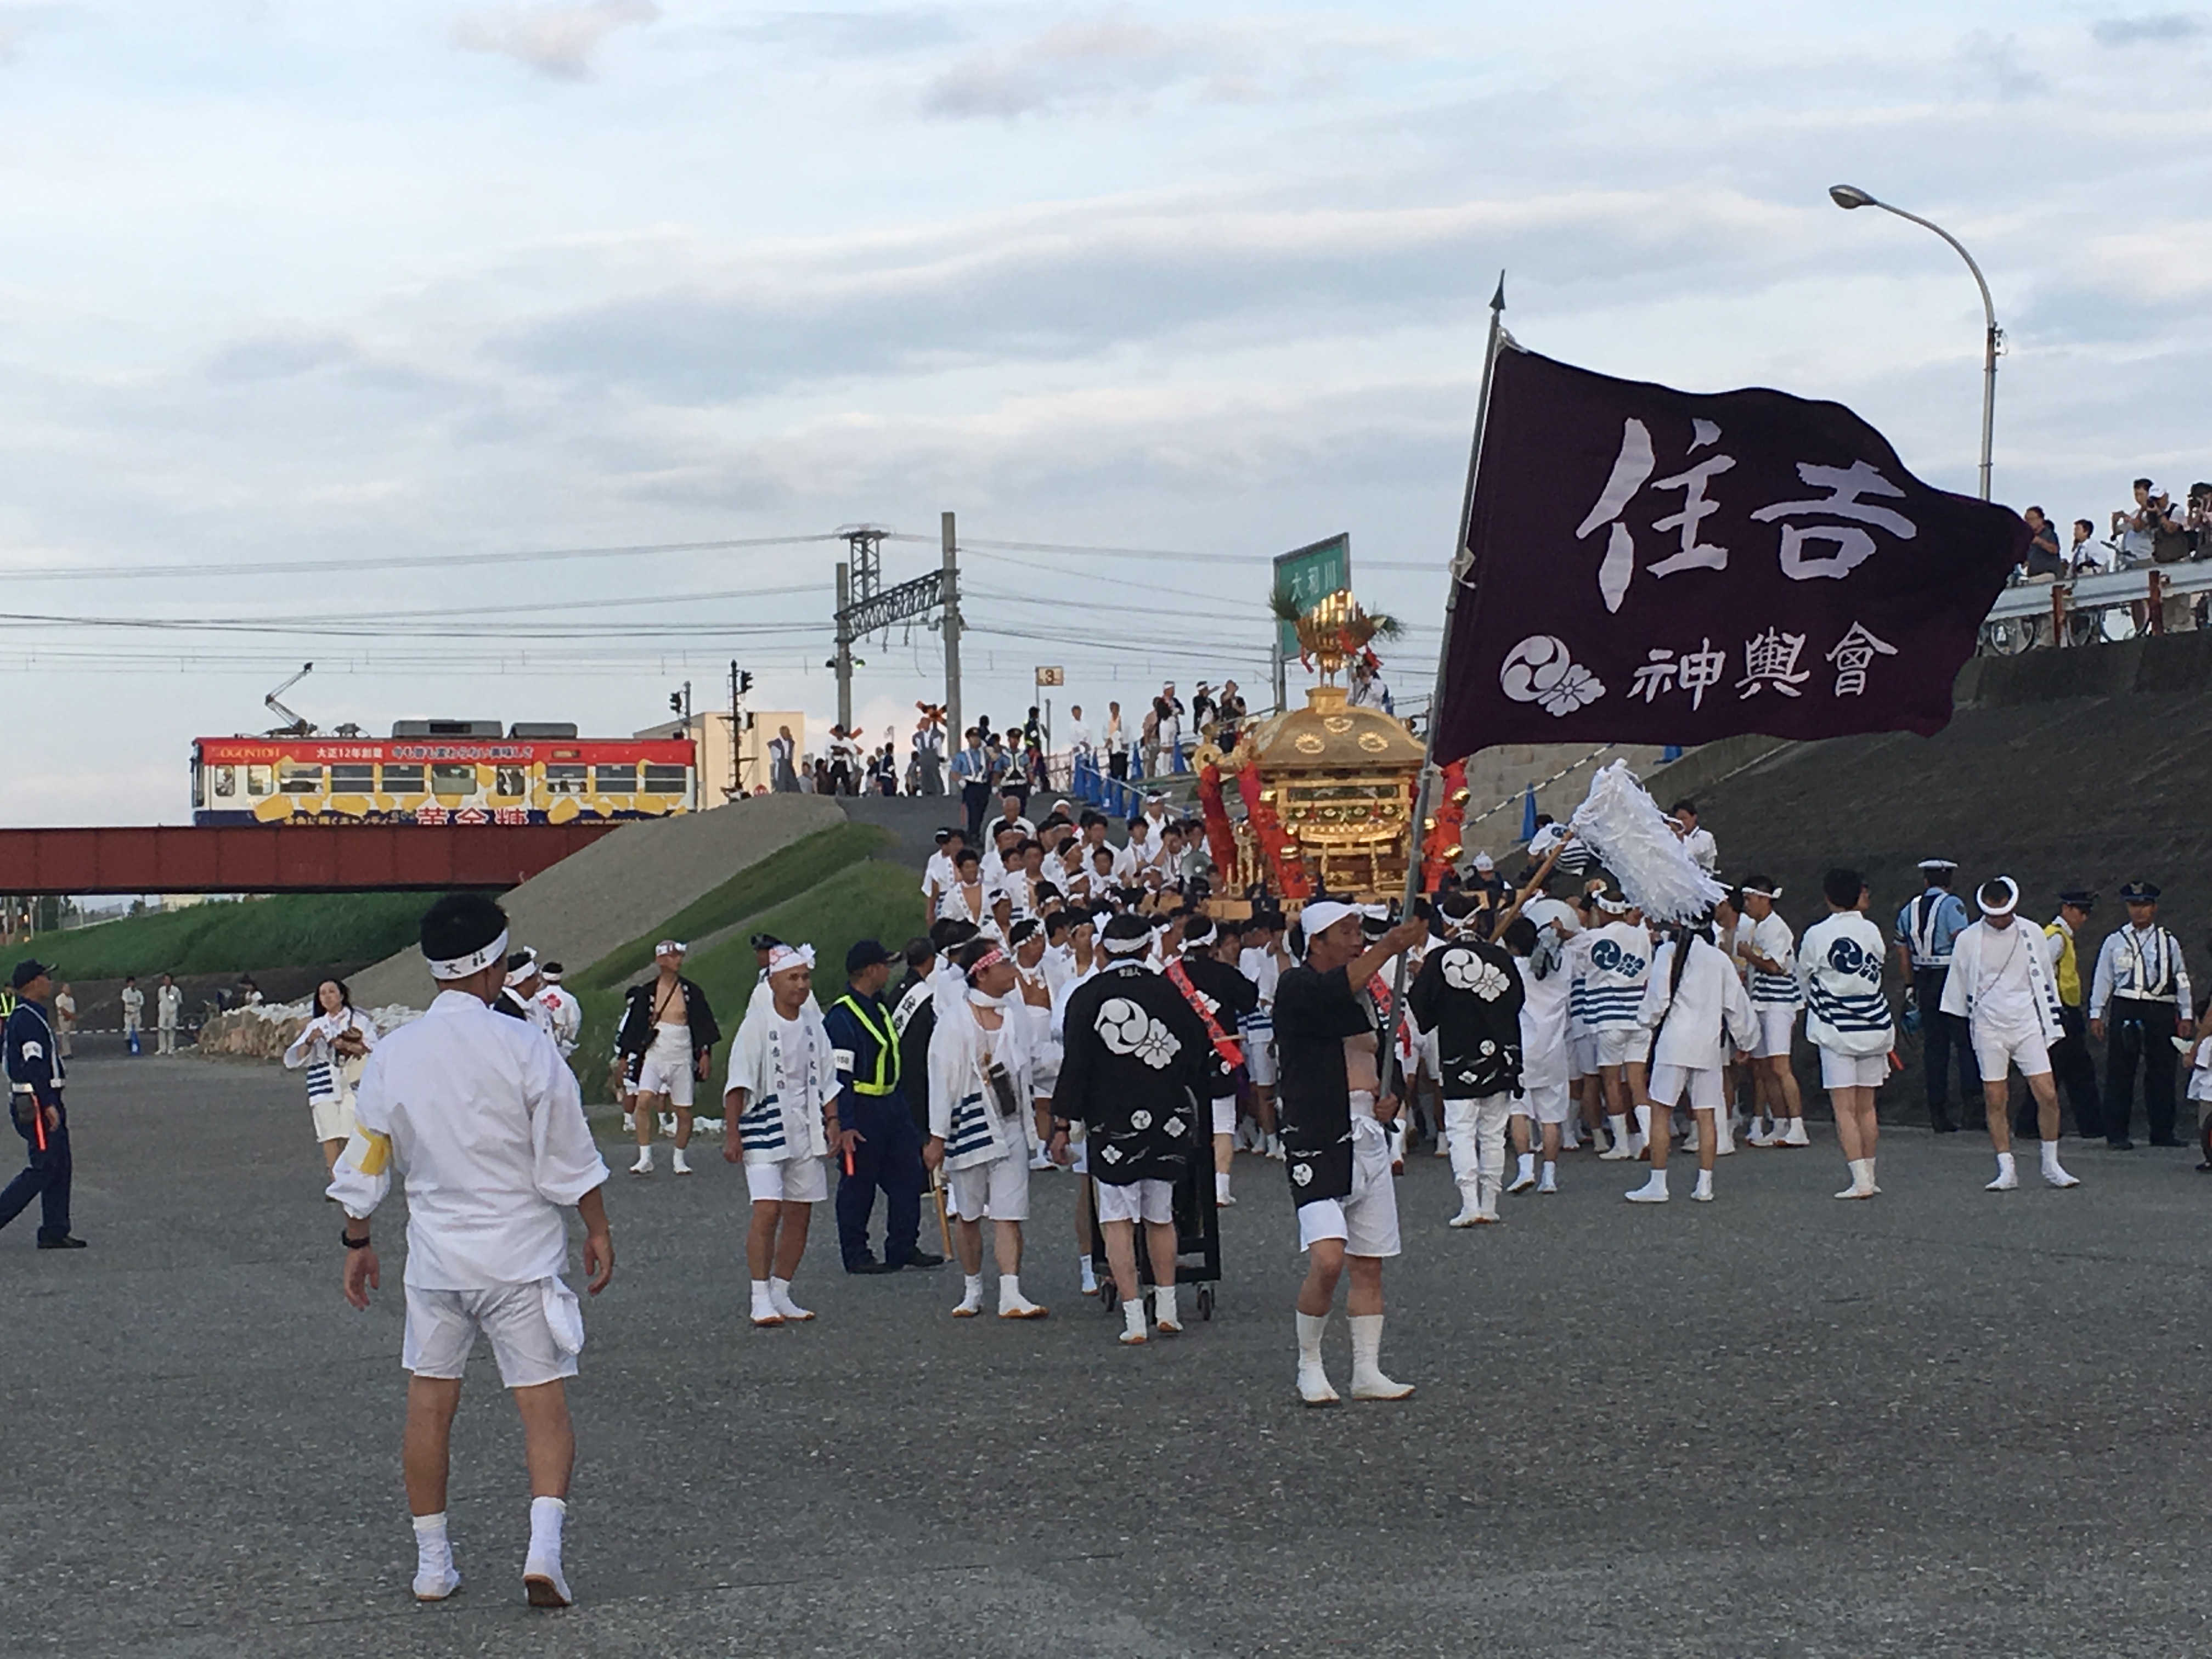 Sumiyoshi Matsuri participants meeting along the river side as a train passes in the distance